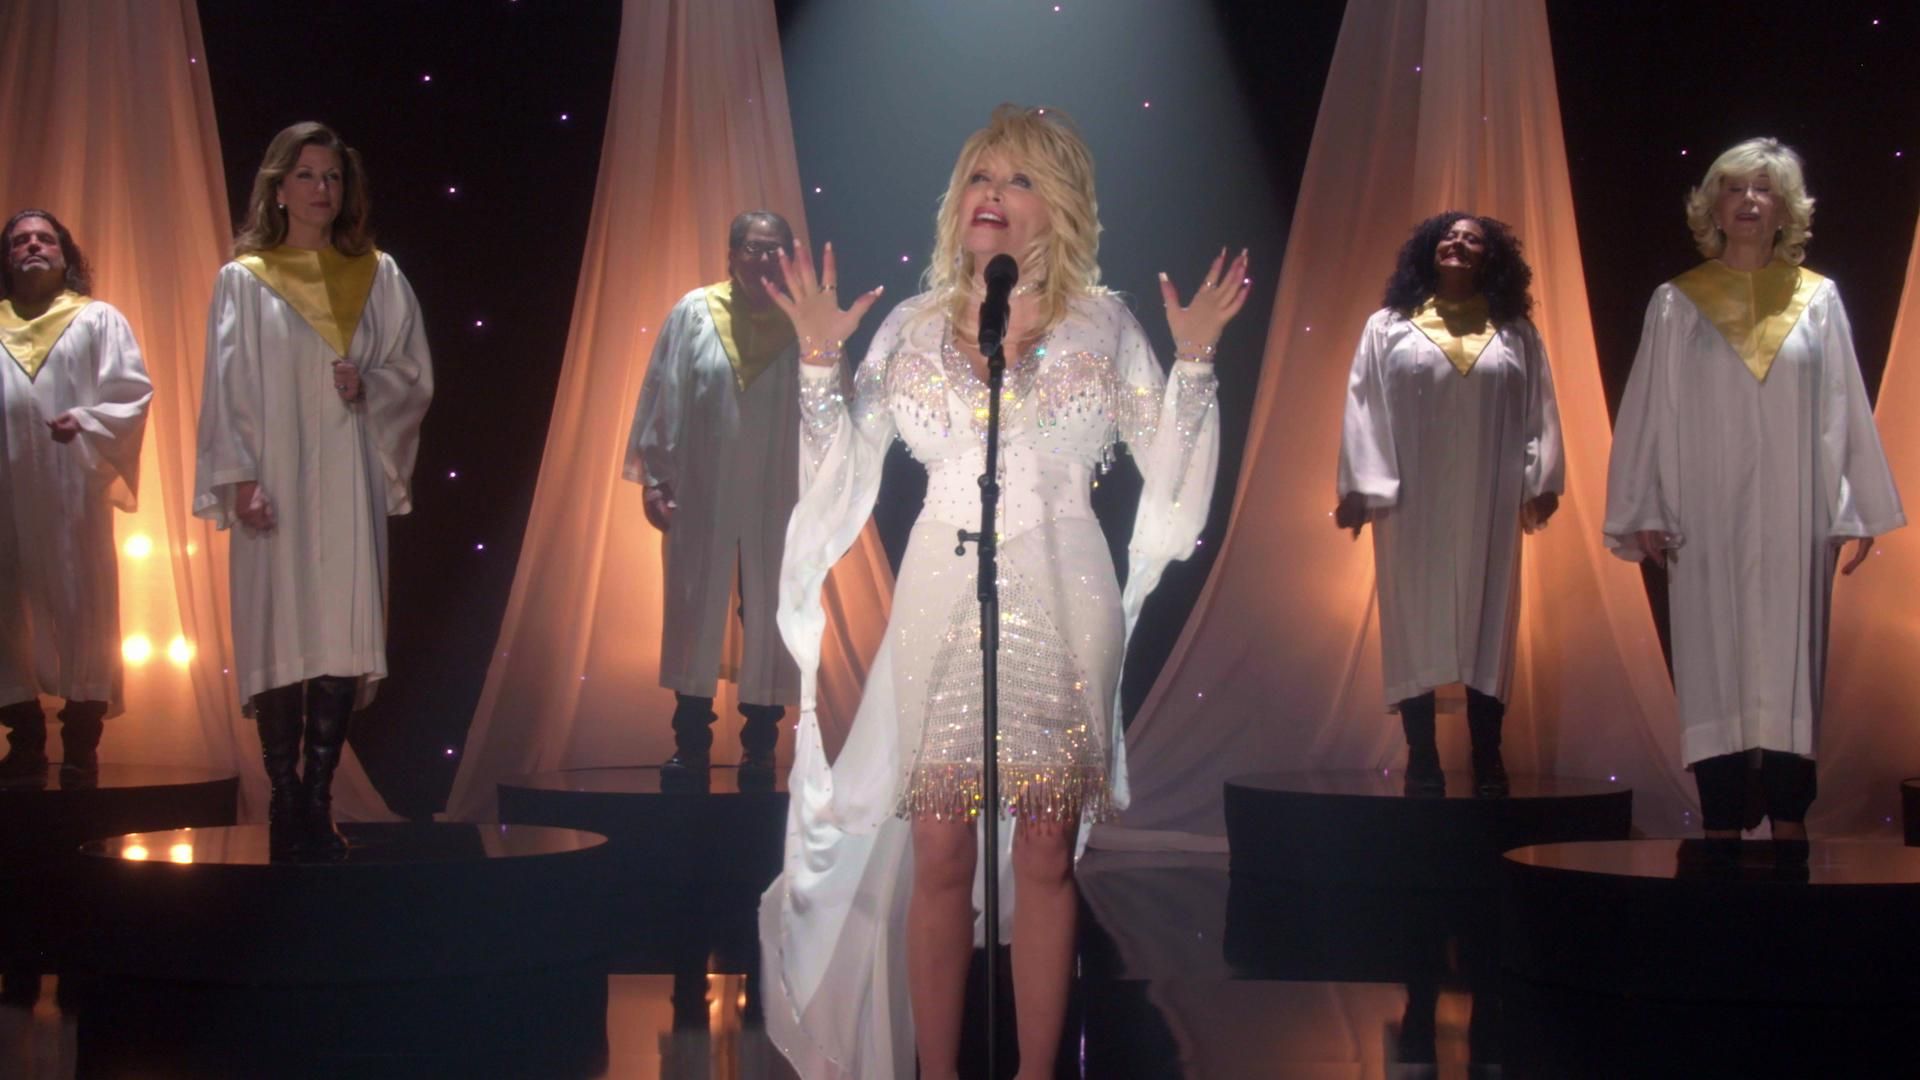 Dolly Parton stands onstage at a microphone wearing a white dress with gold trim while backed by choir singers in white robes